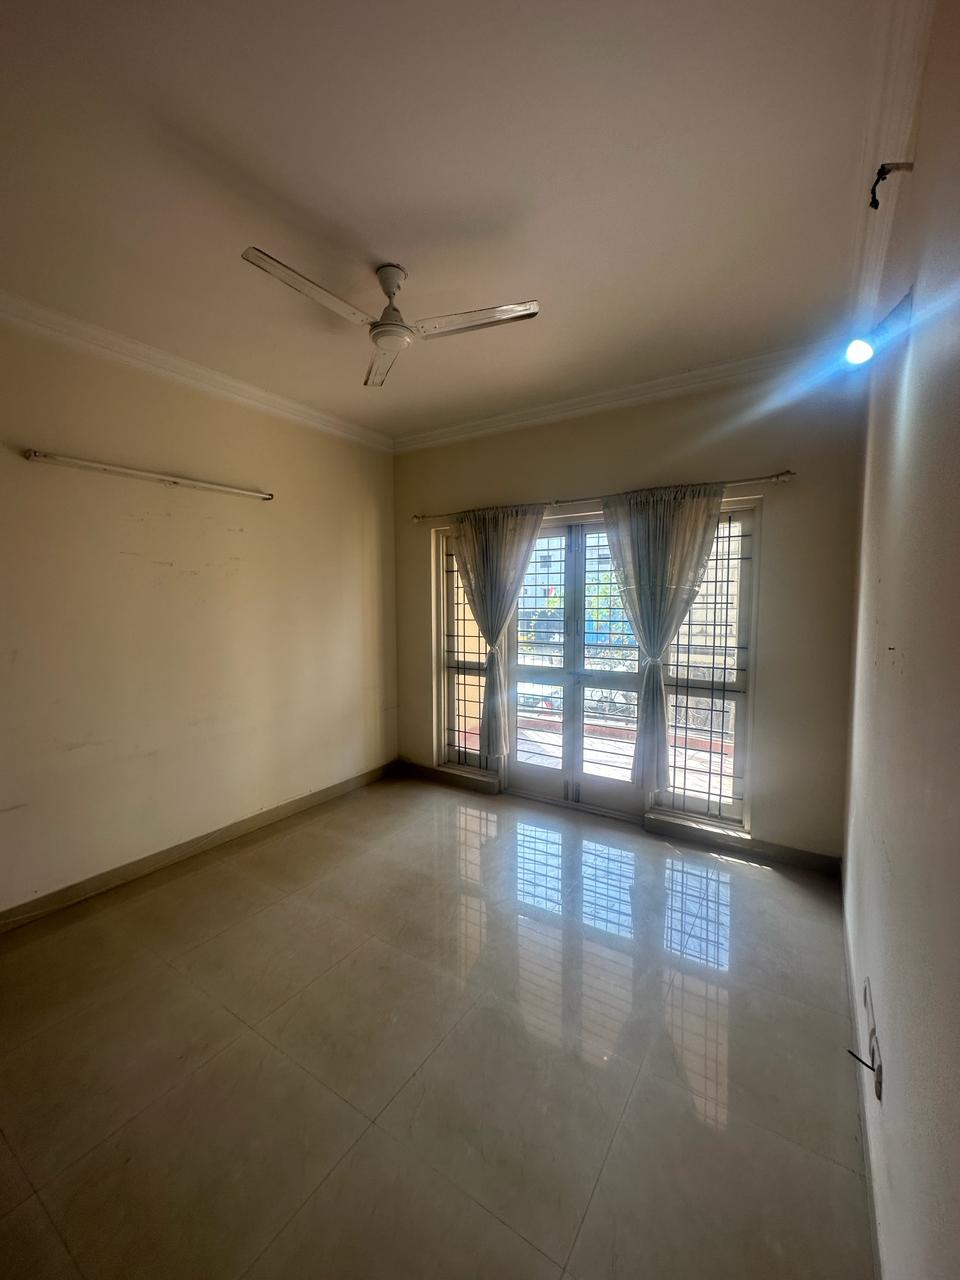 2 BHK Residential Apartment for Lease Only at JAML2 - 1698 in M.S. Ramaiah Nagar